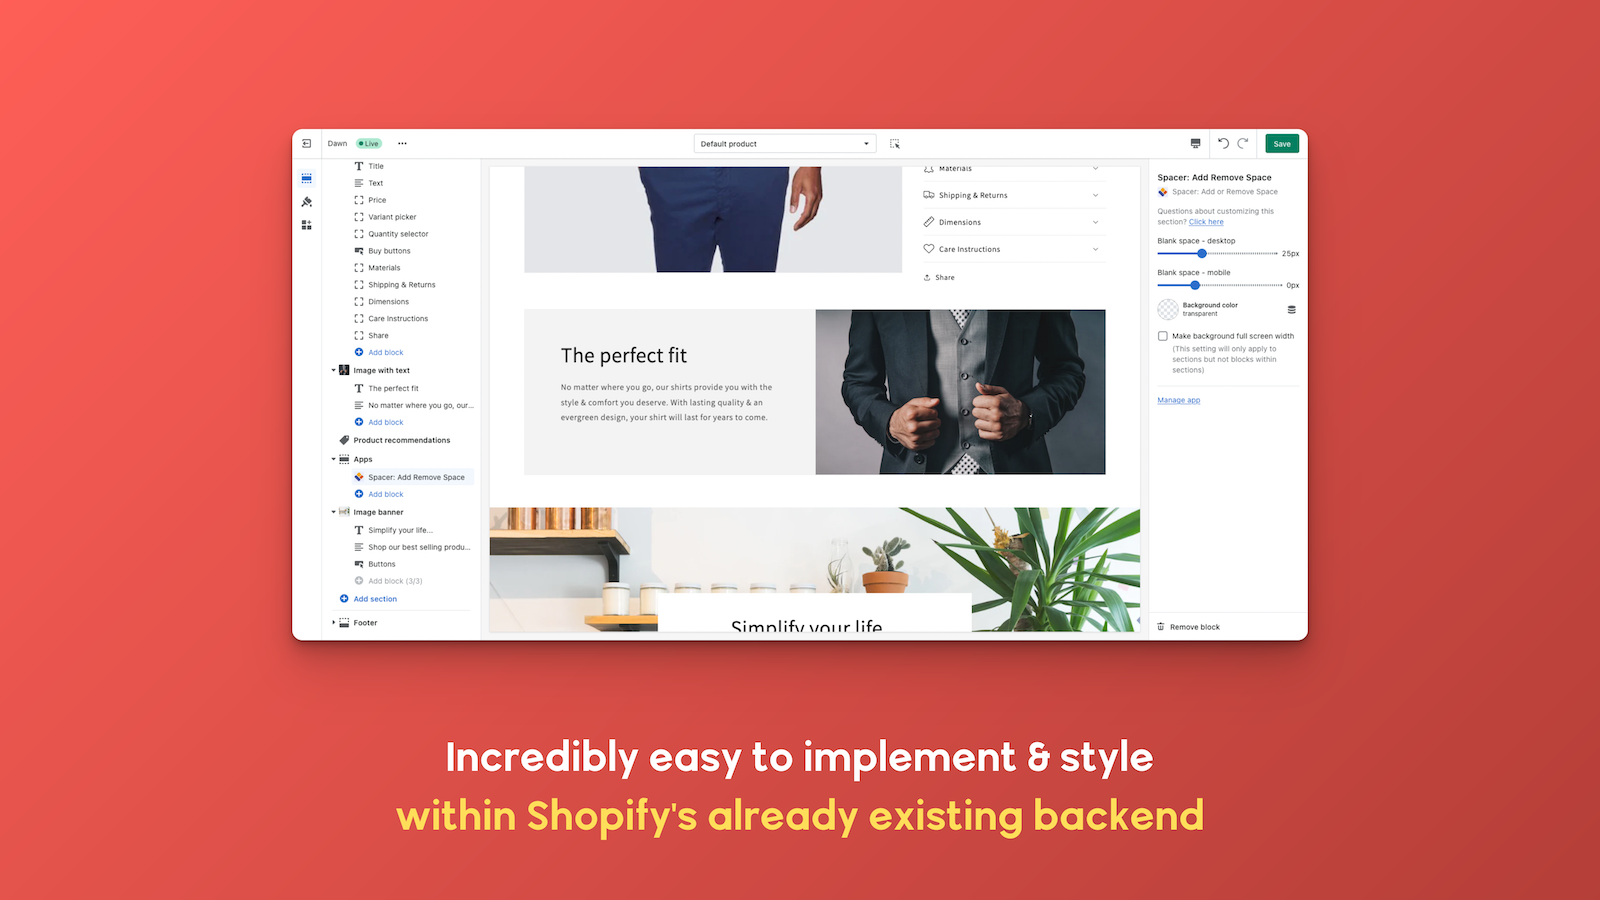 Incredibly easy to implement and style within Shopify's backend